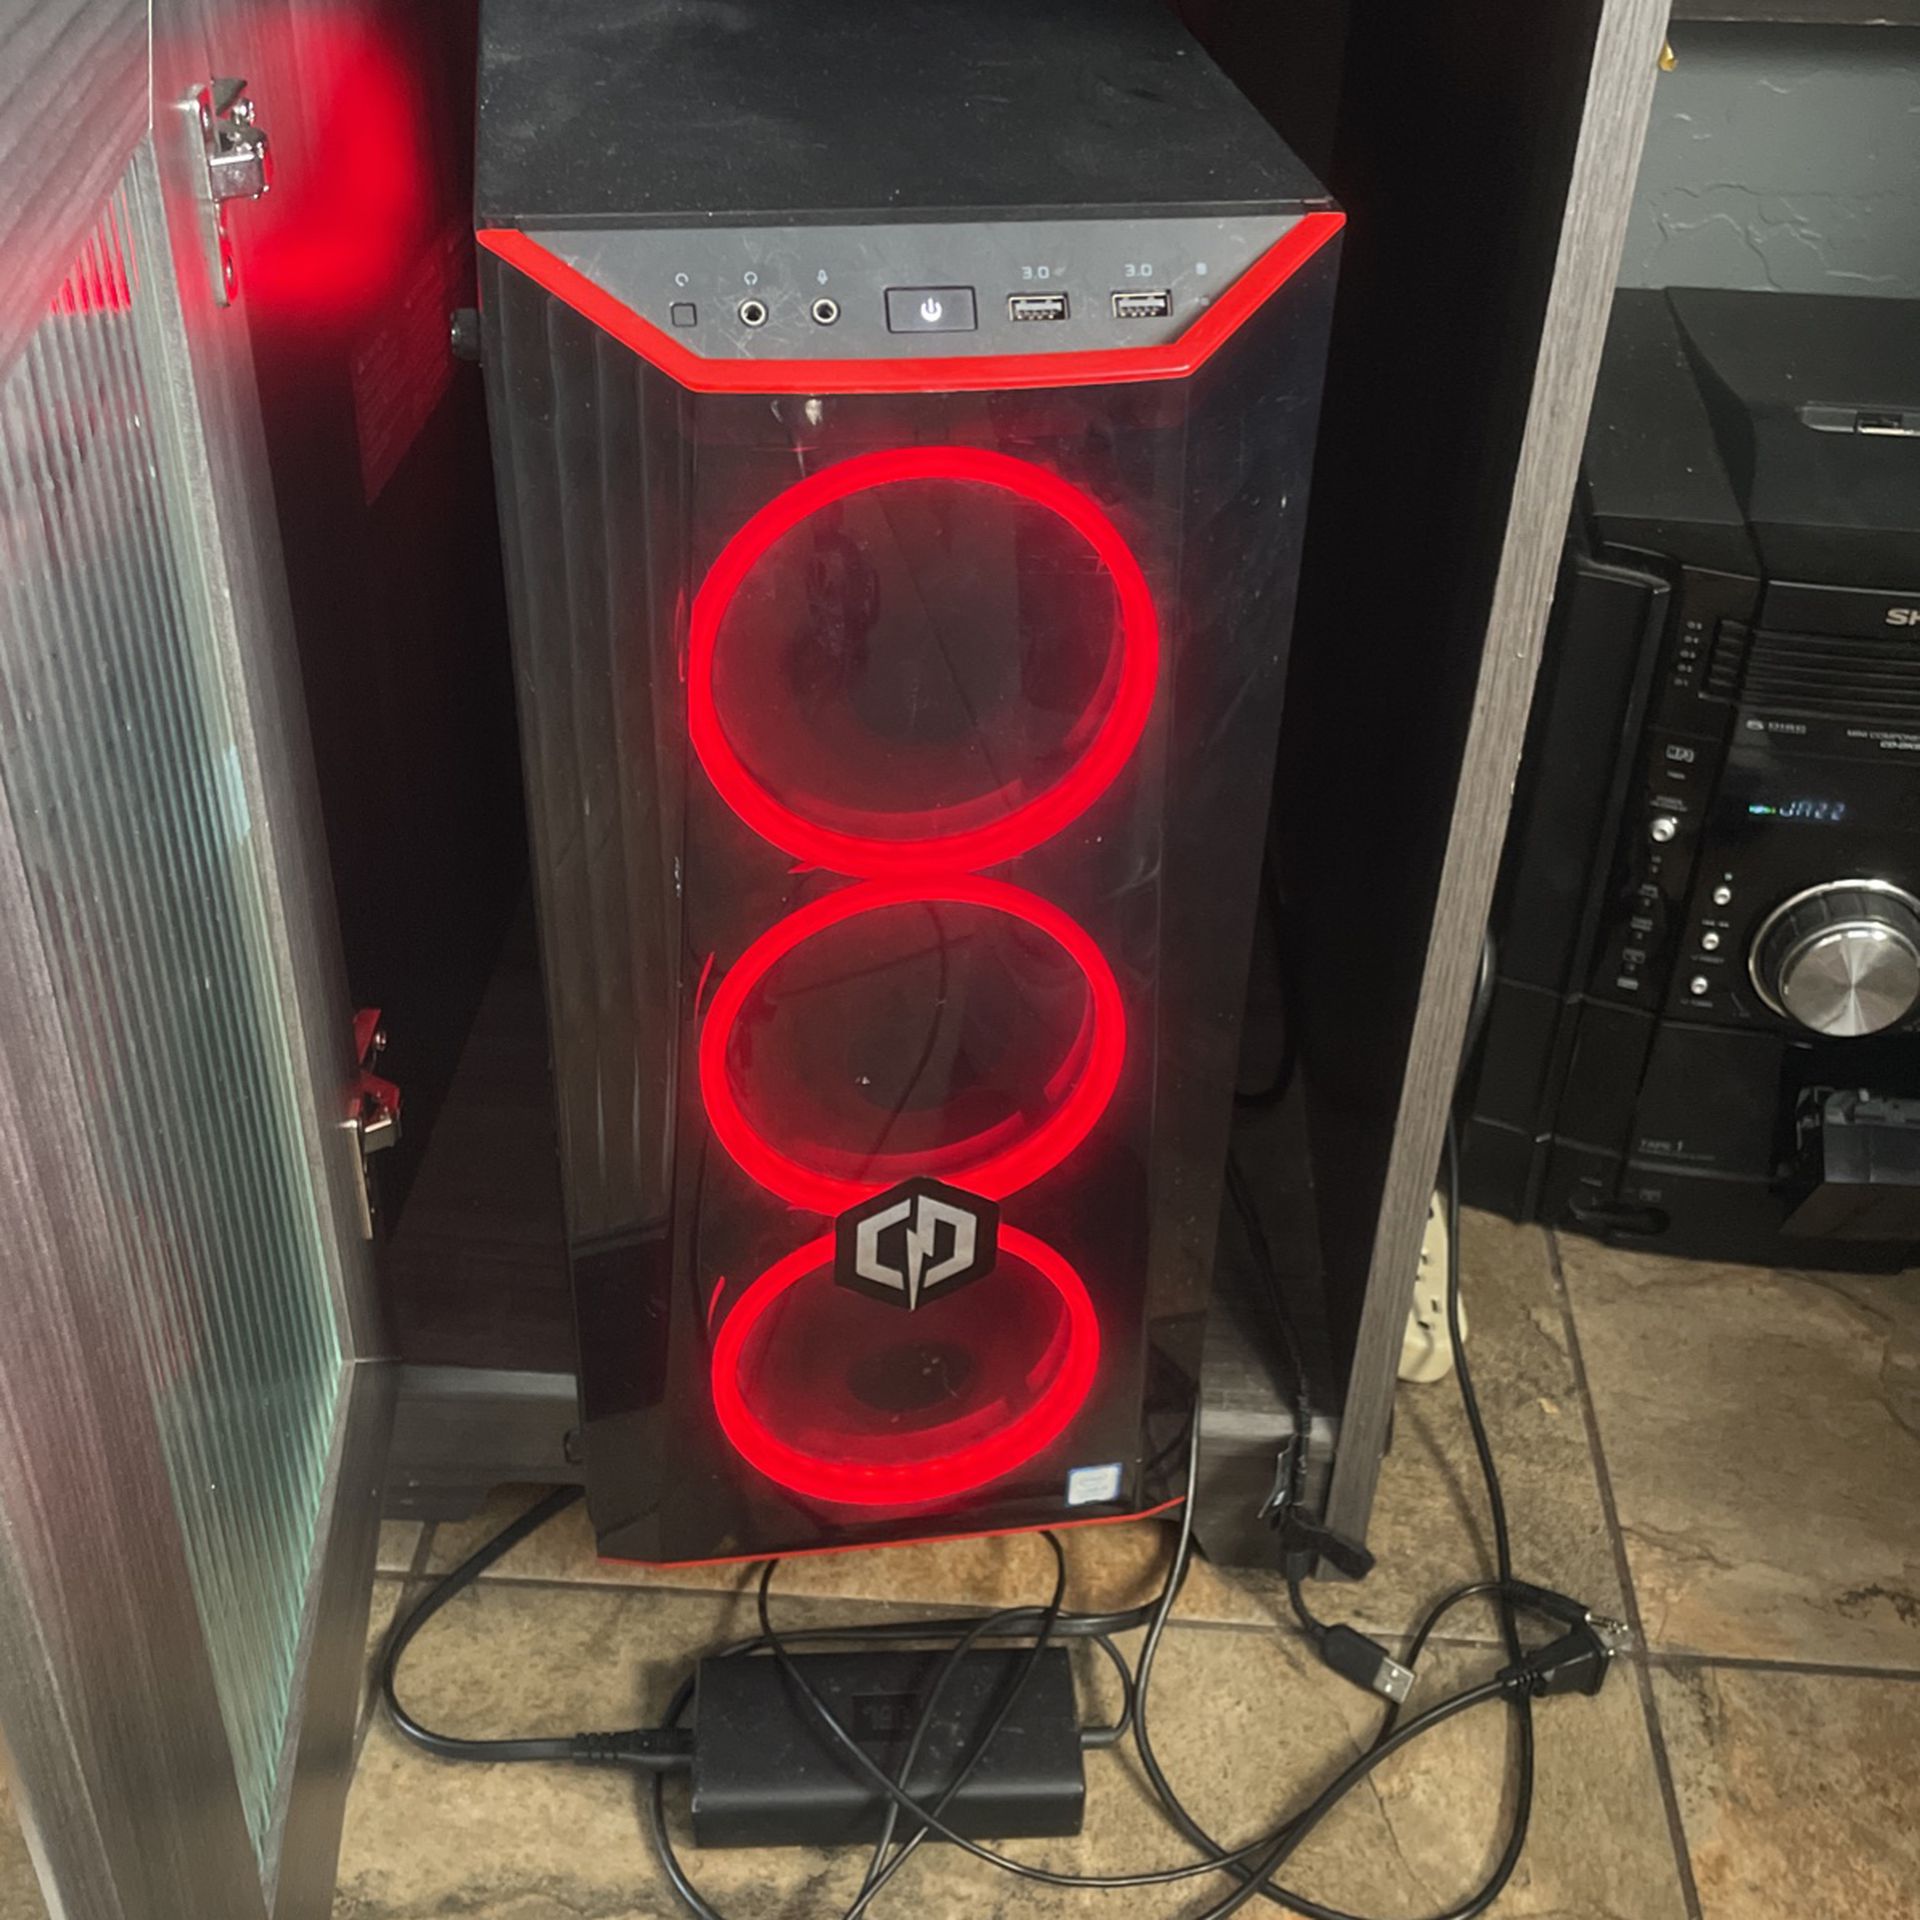 Cyberpower Gaming PC for Sale in Riverside, CA - OfferUp